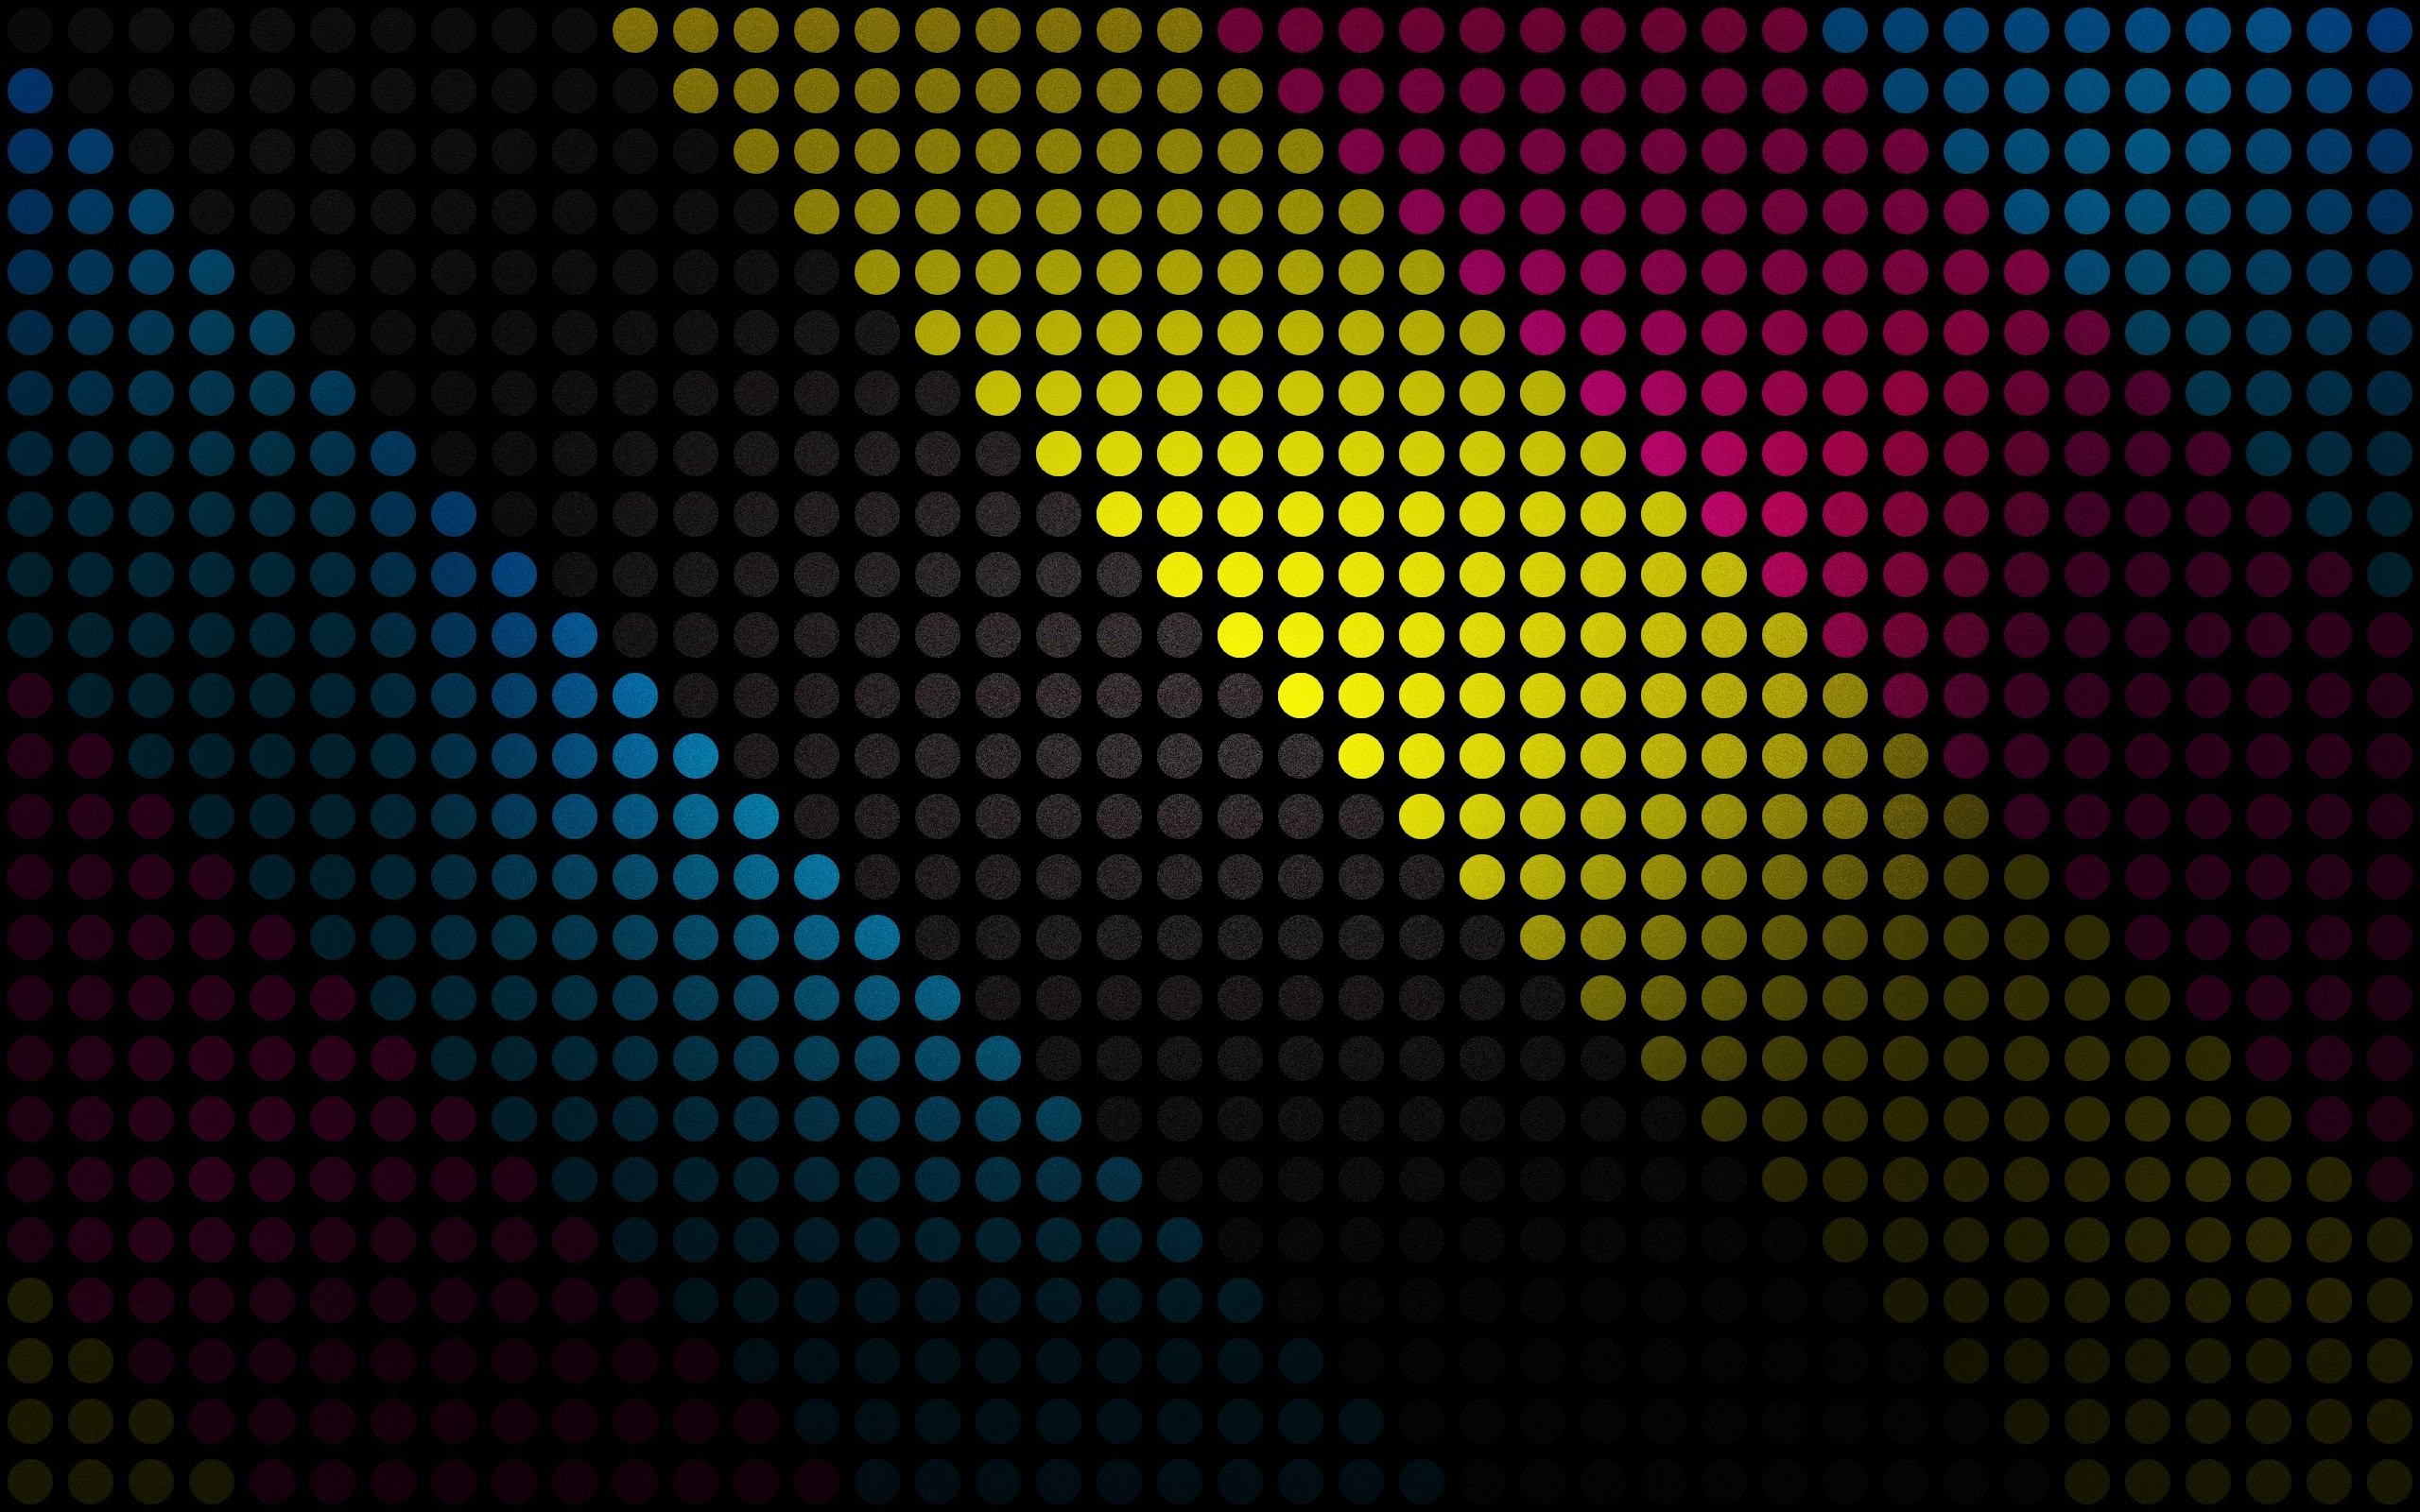 2560x1600 30 wallpapers perfect for AMOLED screens